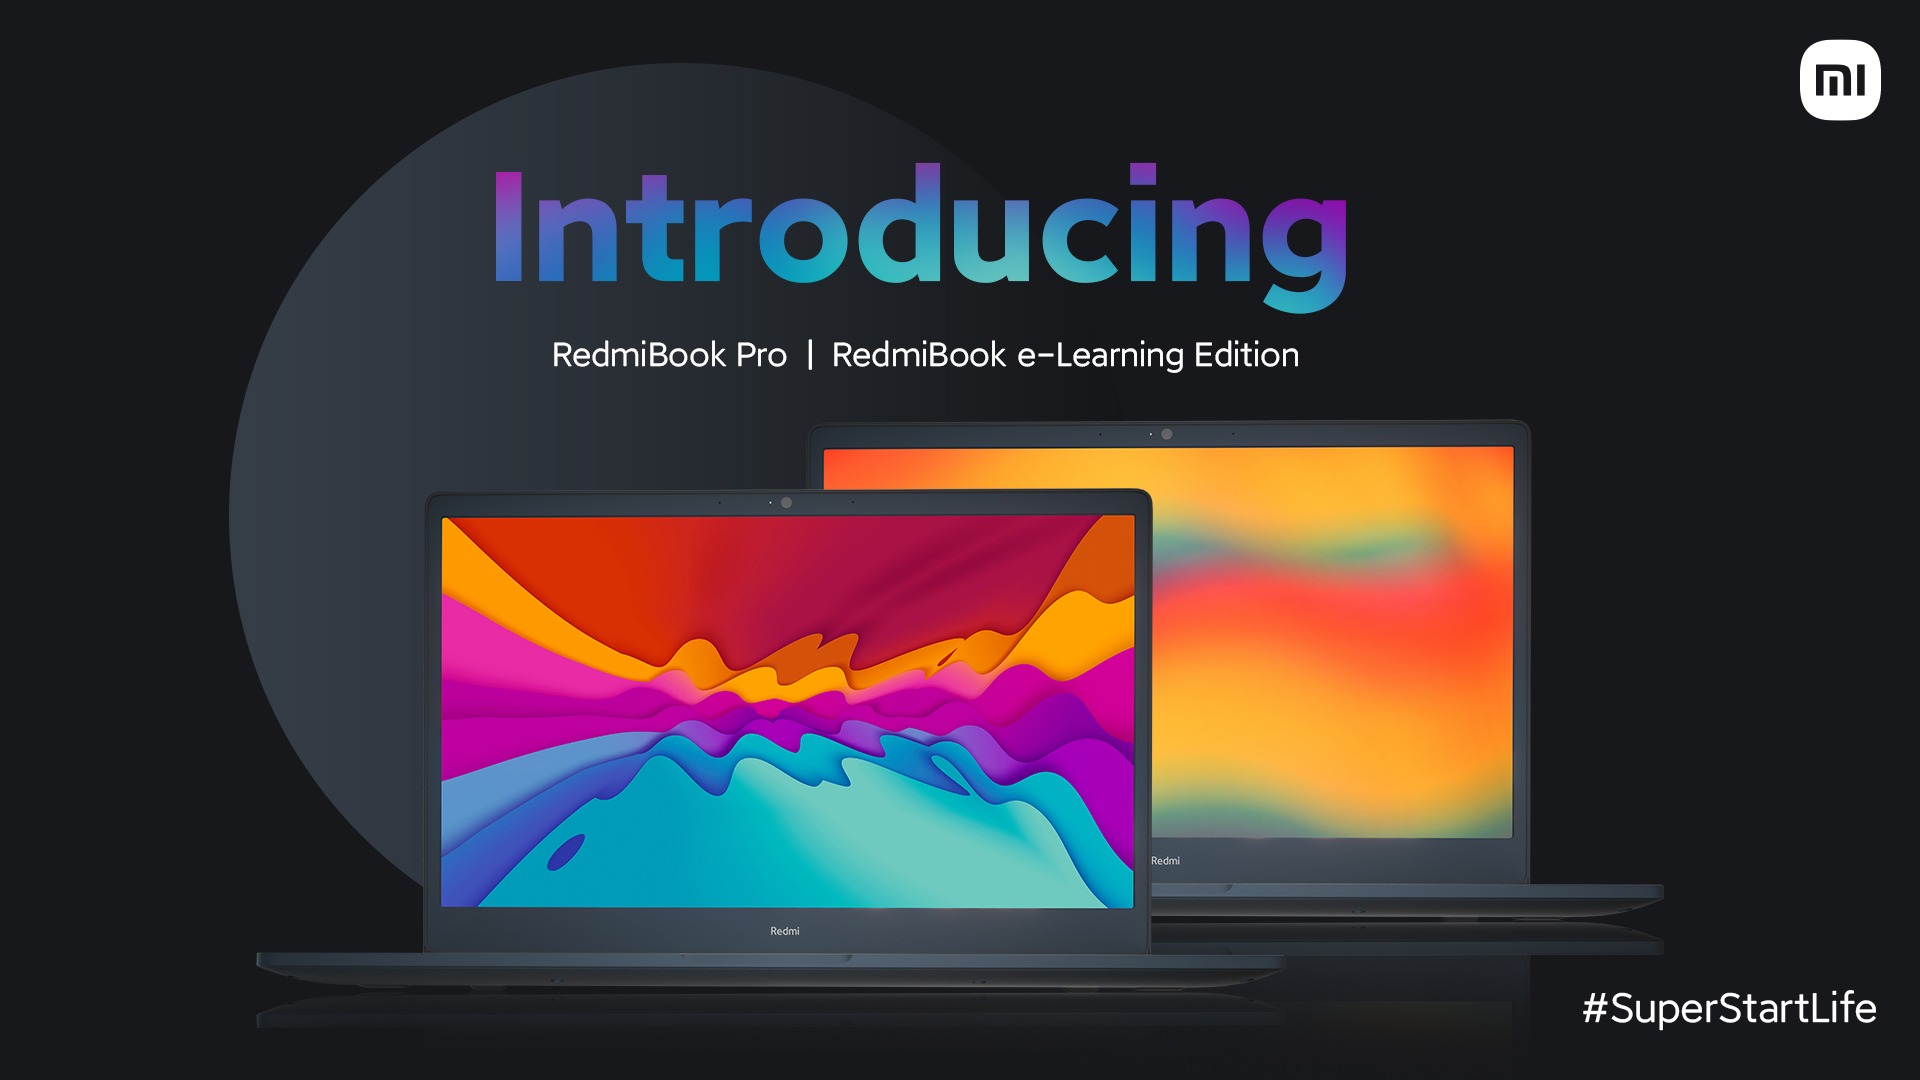 RedmiBook Pro and RedmiBook e-Learning Edition Laptops launched in India